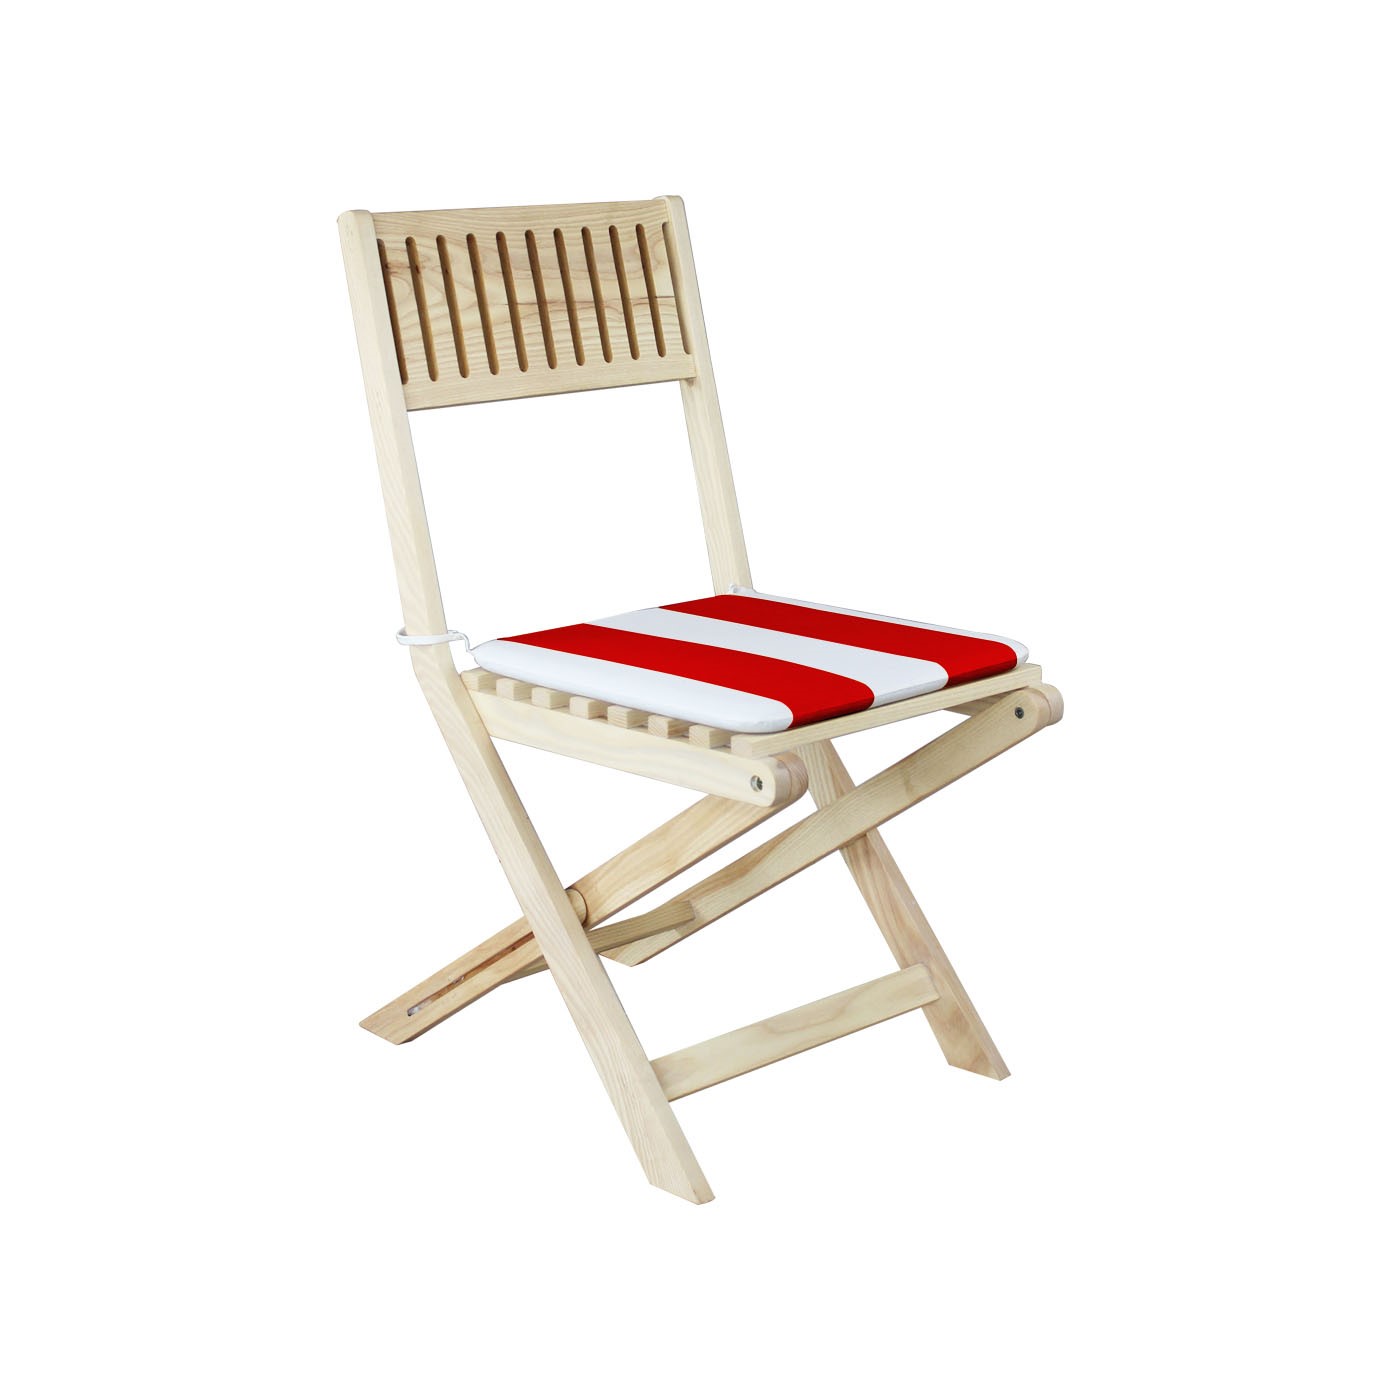 Palermo Red & White Striped Light Folding Chair